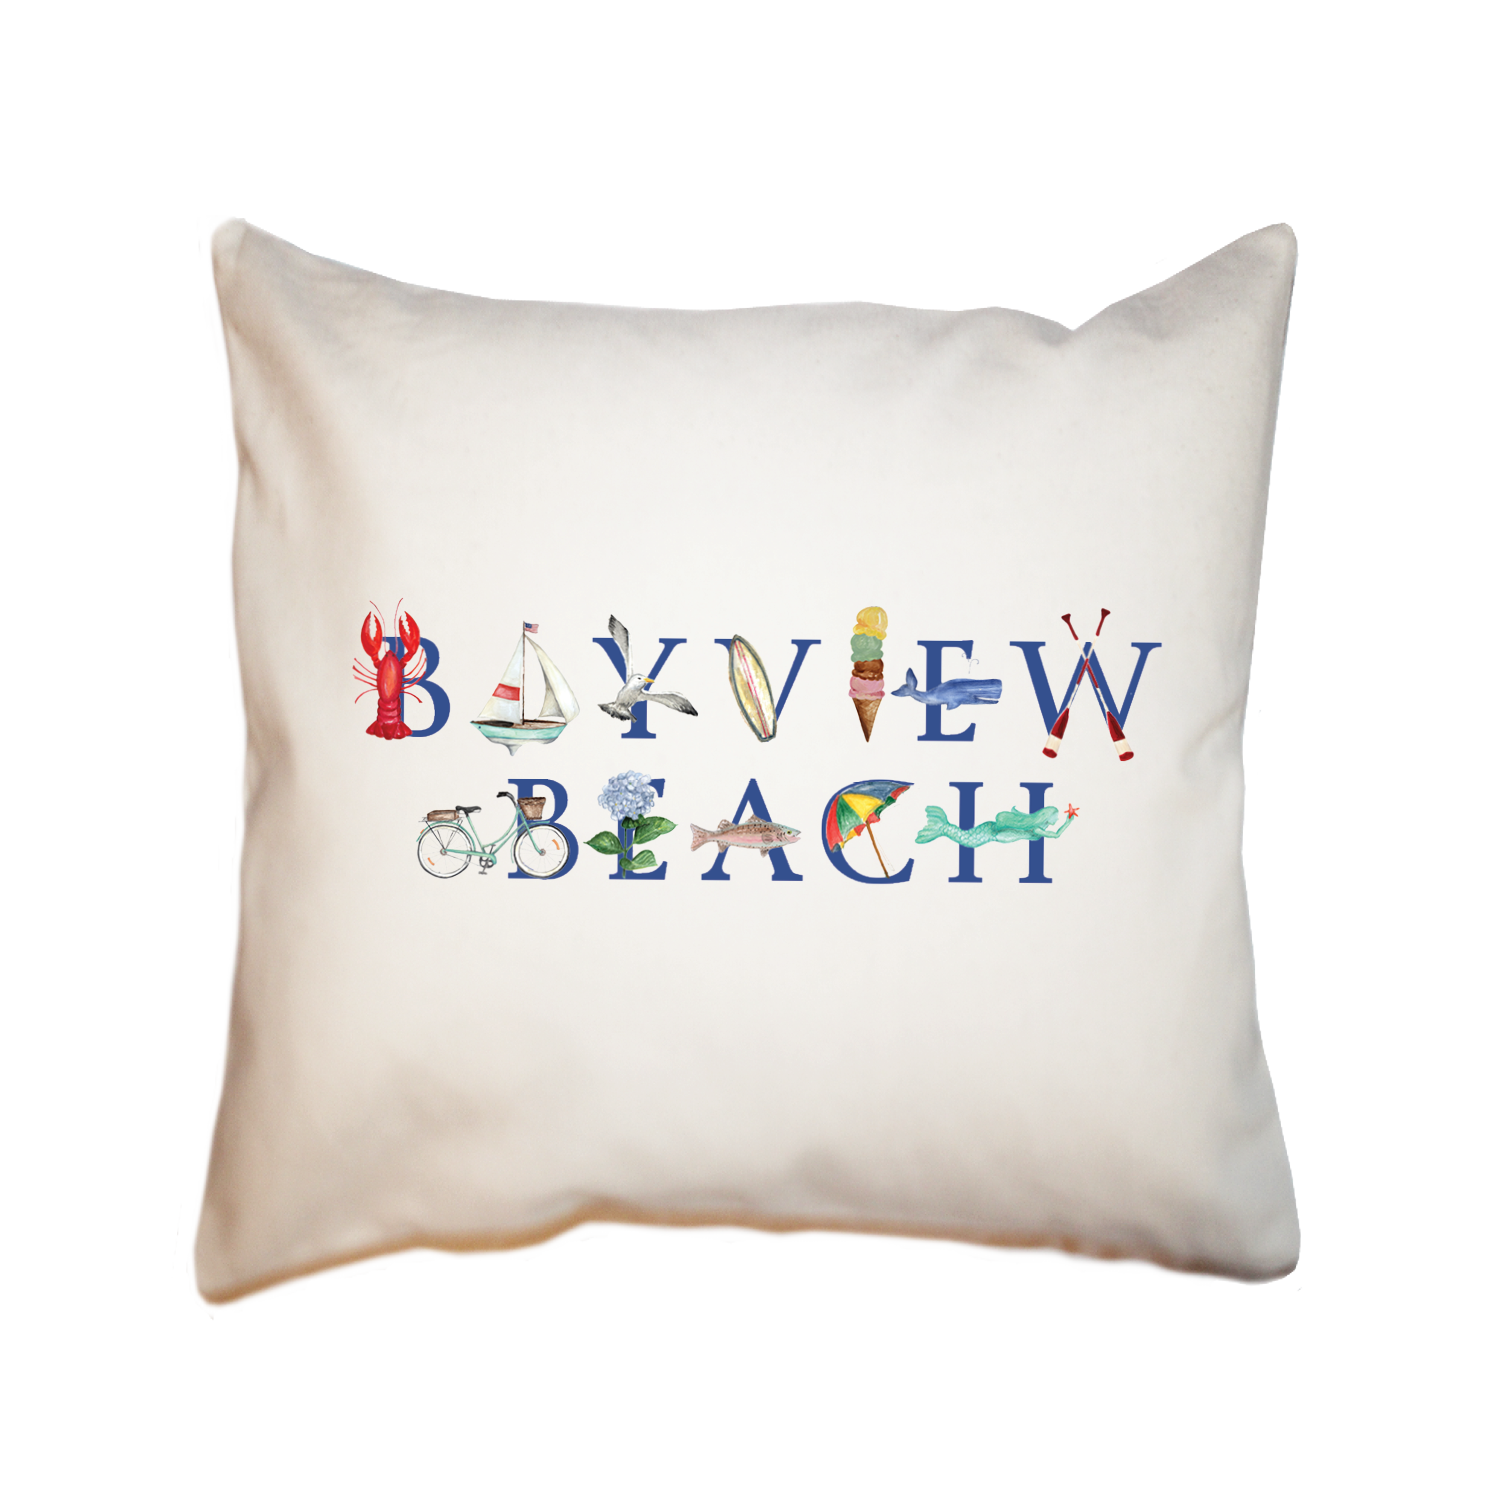 bayview beach square pillow